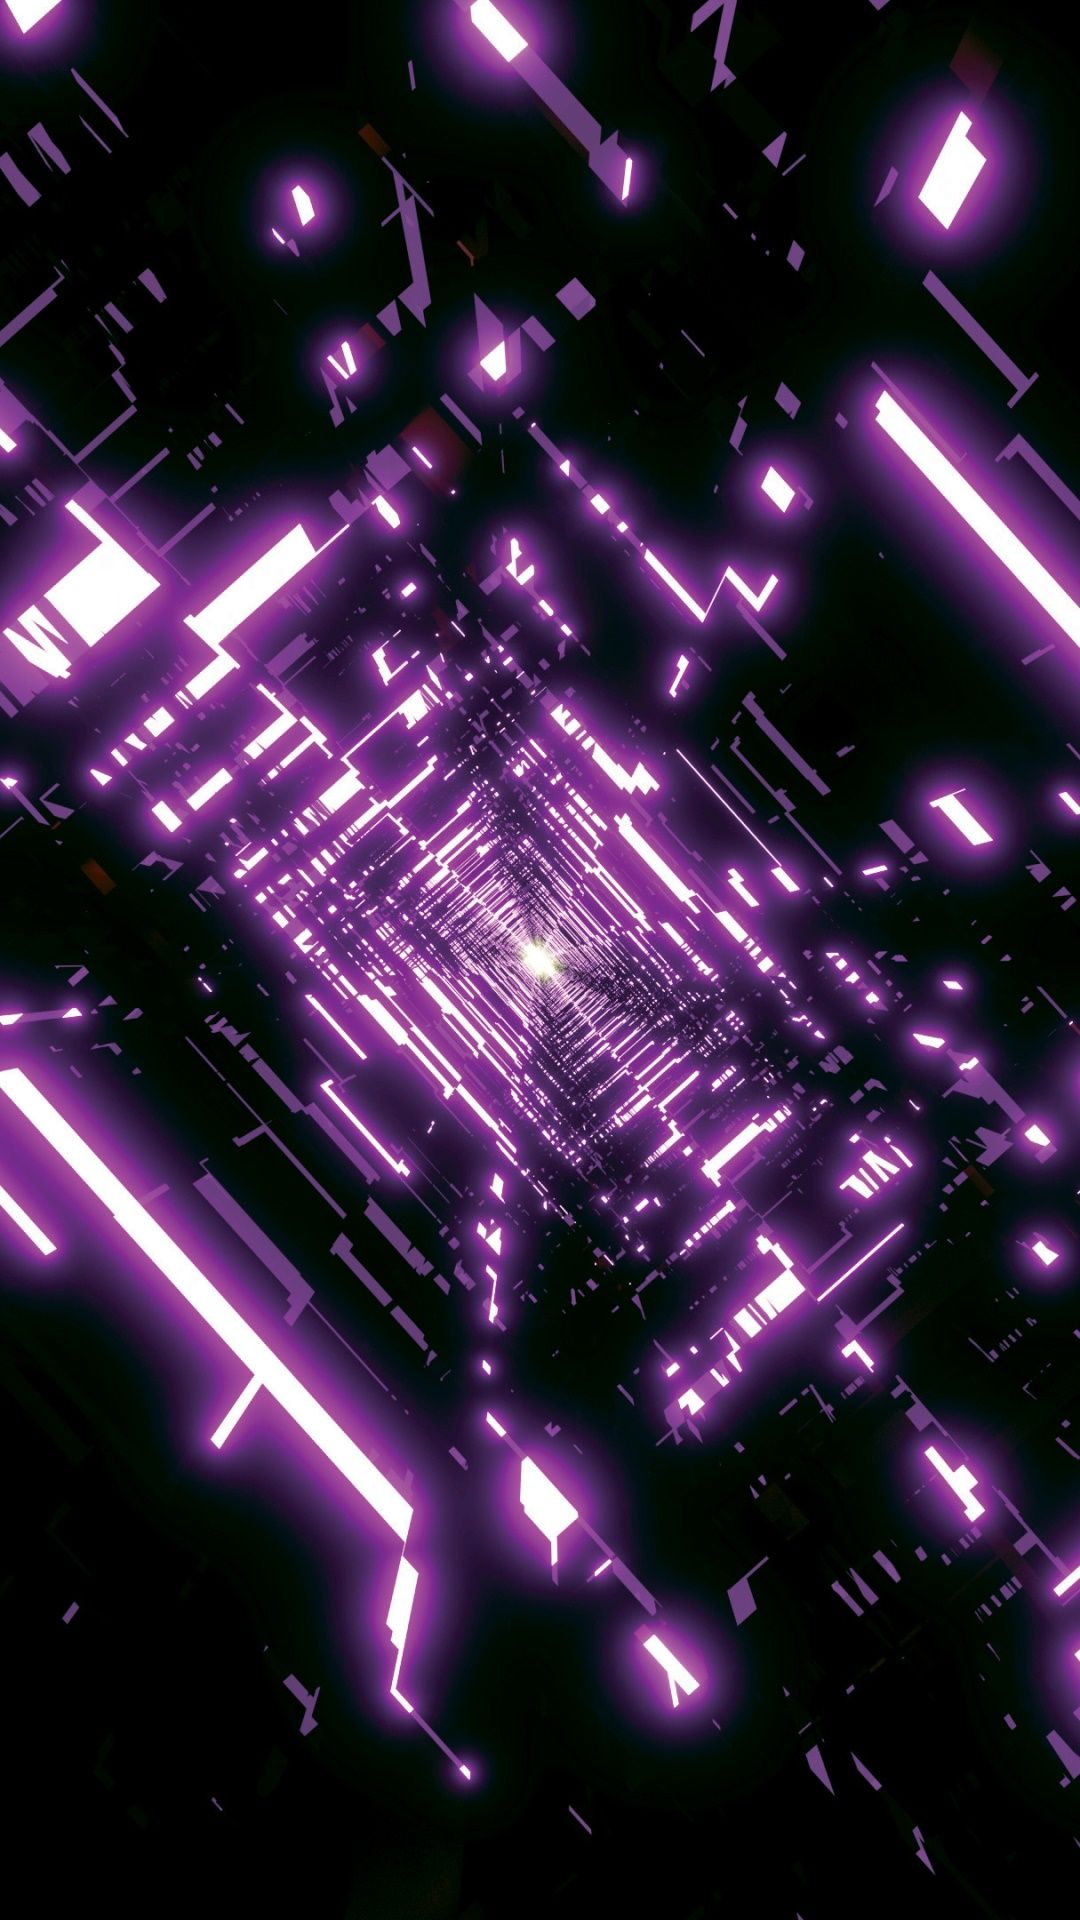 Wallpaper / Artistic Abstract Phone Wallpaper, Black, Purple, Tunnel, Square, 3D, 1080x1920 free download